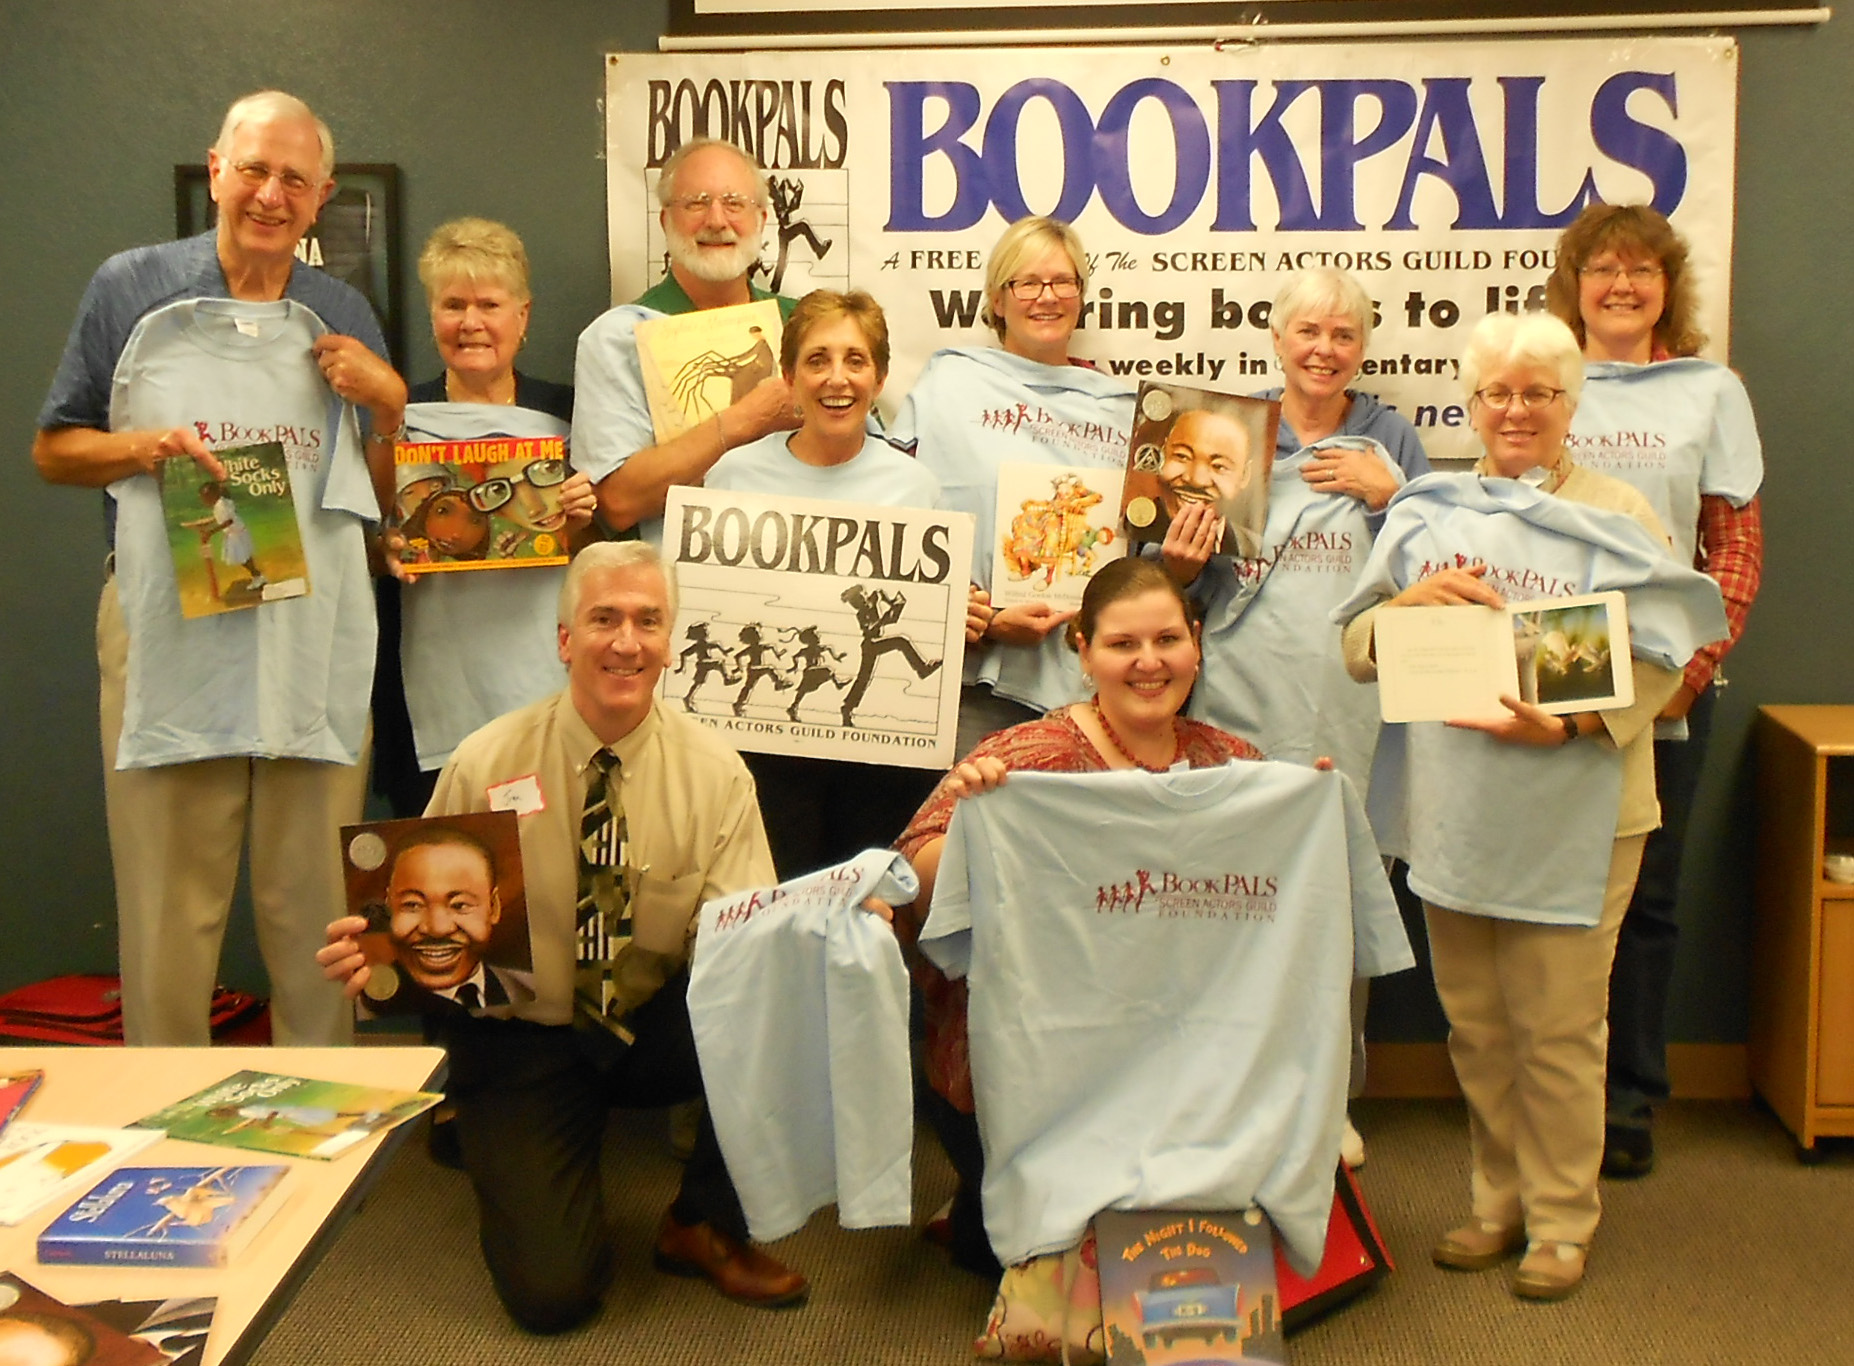 Some of the Flagstaff BookPALS trained in October.